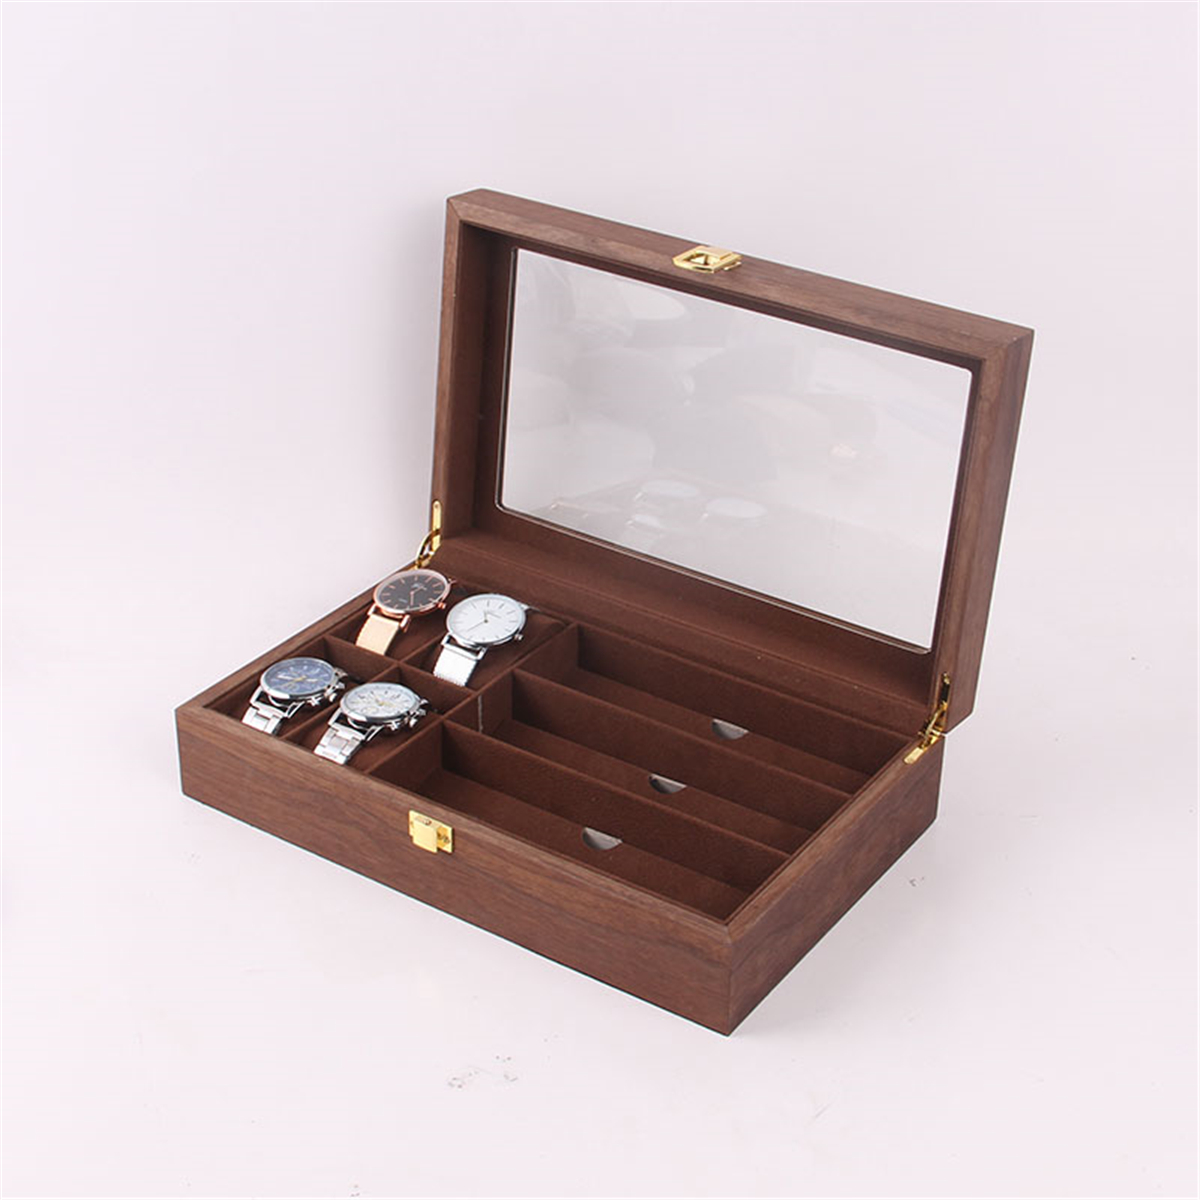 Woden-Watch-Boxes-Necklace-Jewelry-Watch-Display-Box-1658187-6